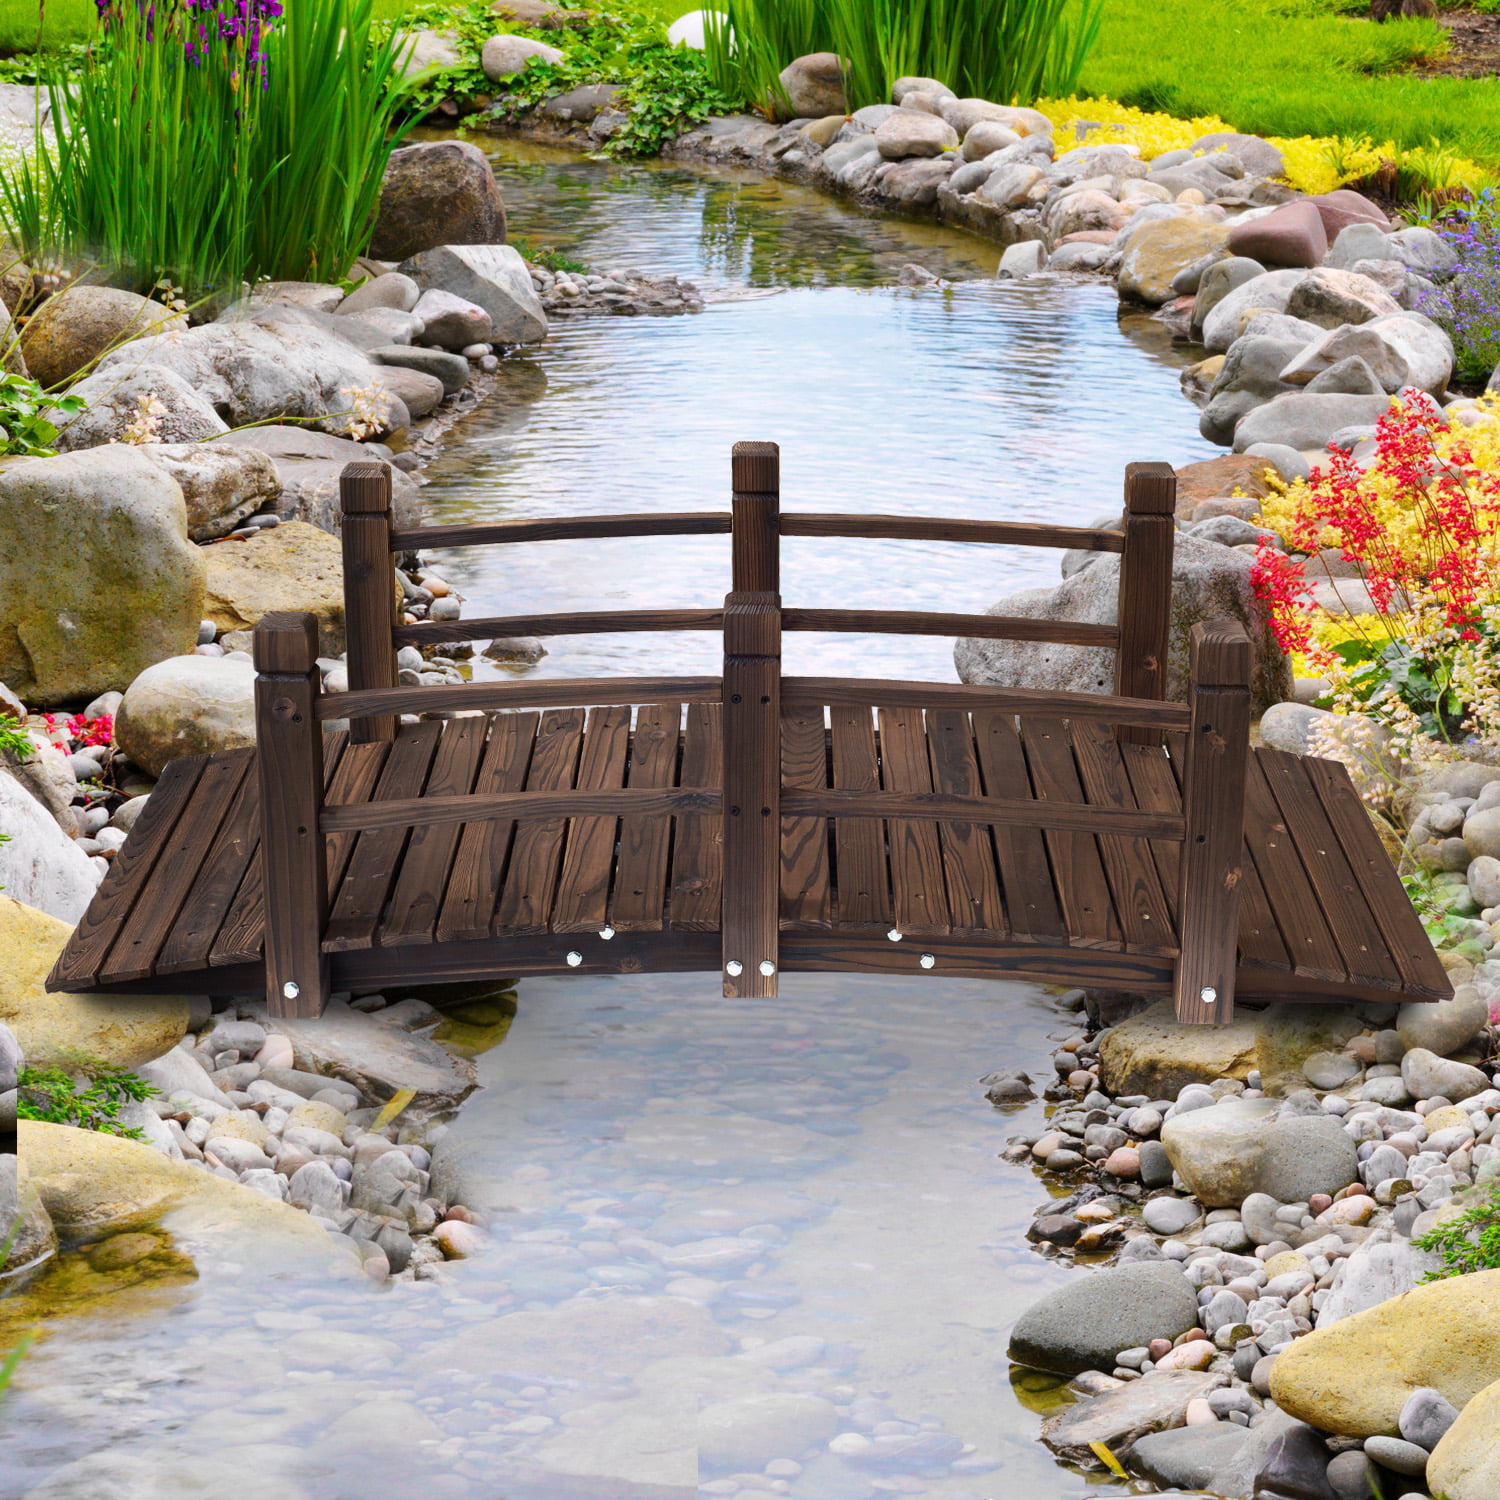 Brown HYNAWIN Garden Bridge,Wood Arc Bridge with Rails for outside-5FT Length ,Classic Decoration for Landscaping Backyard Creek Pond or Farm 